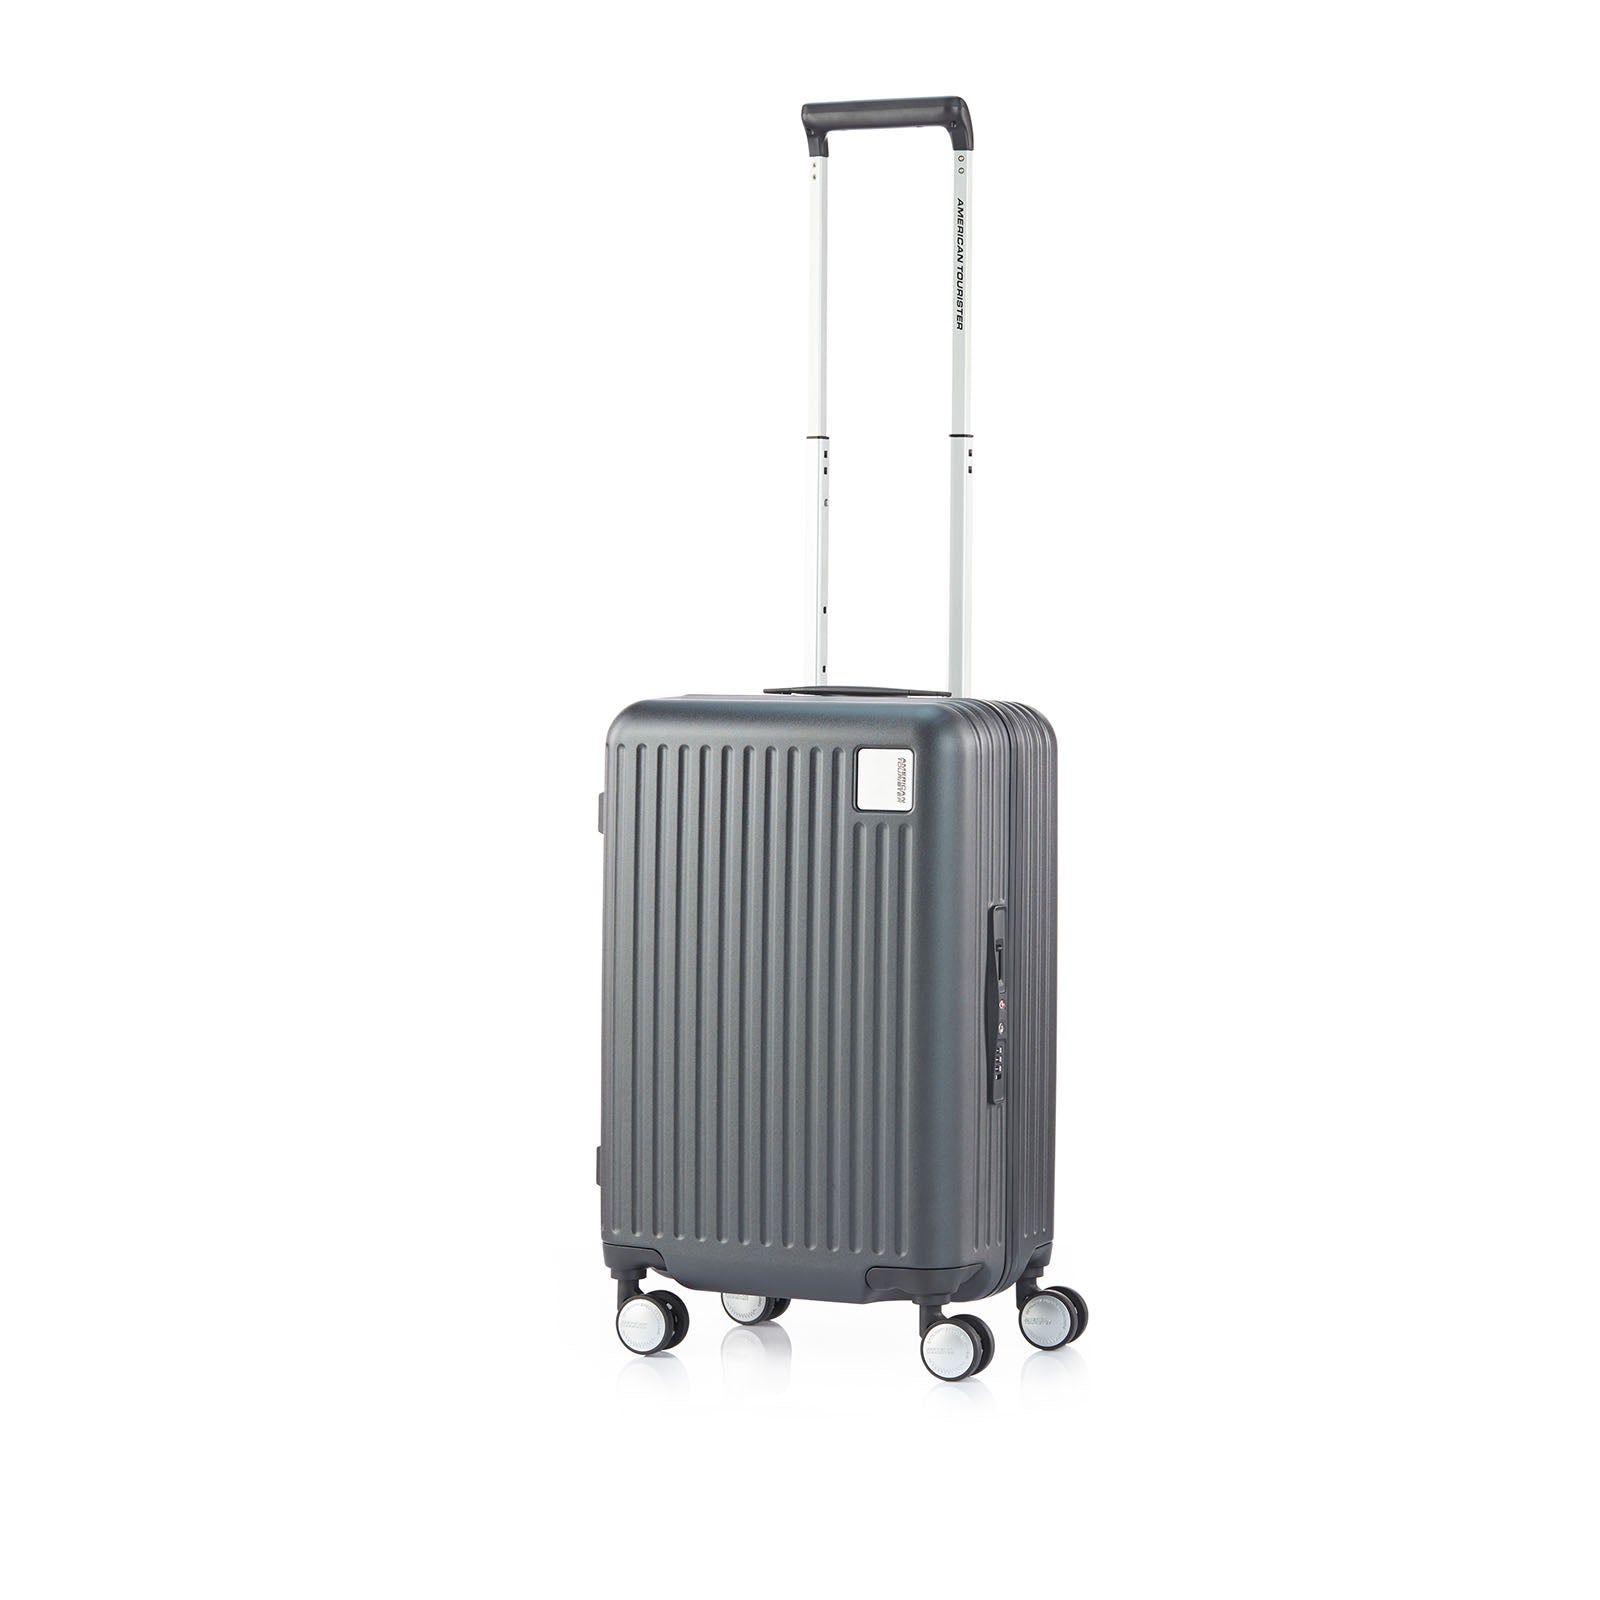 American-Tourister-Lockation-55cm-Carry-On-Suitcase-Black-Front-Angle